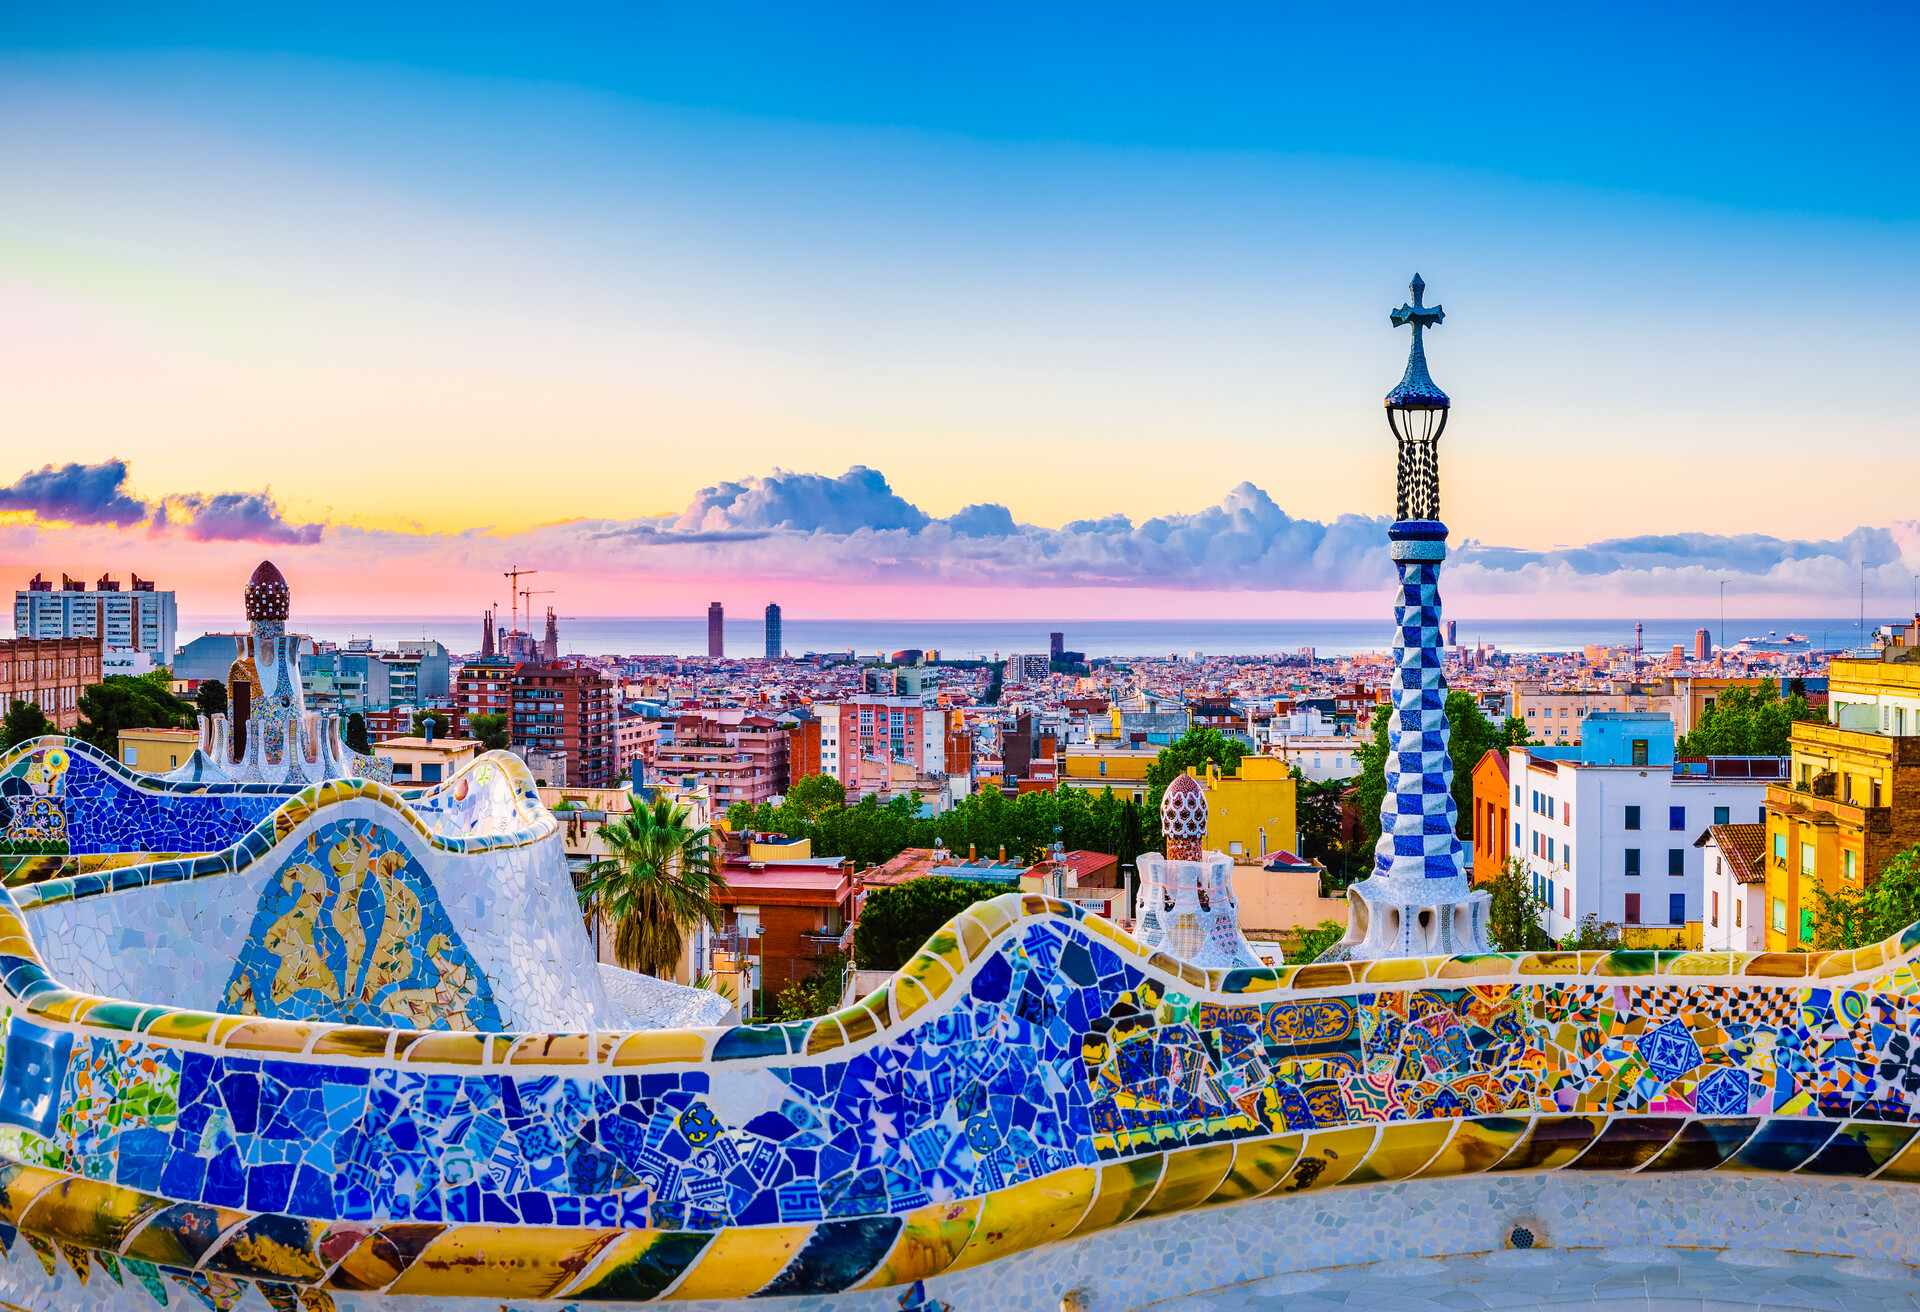 Barcelona at sunrise viewed from park Guell, Spain; Shutterstock ID 1062407402